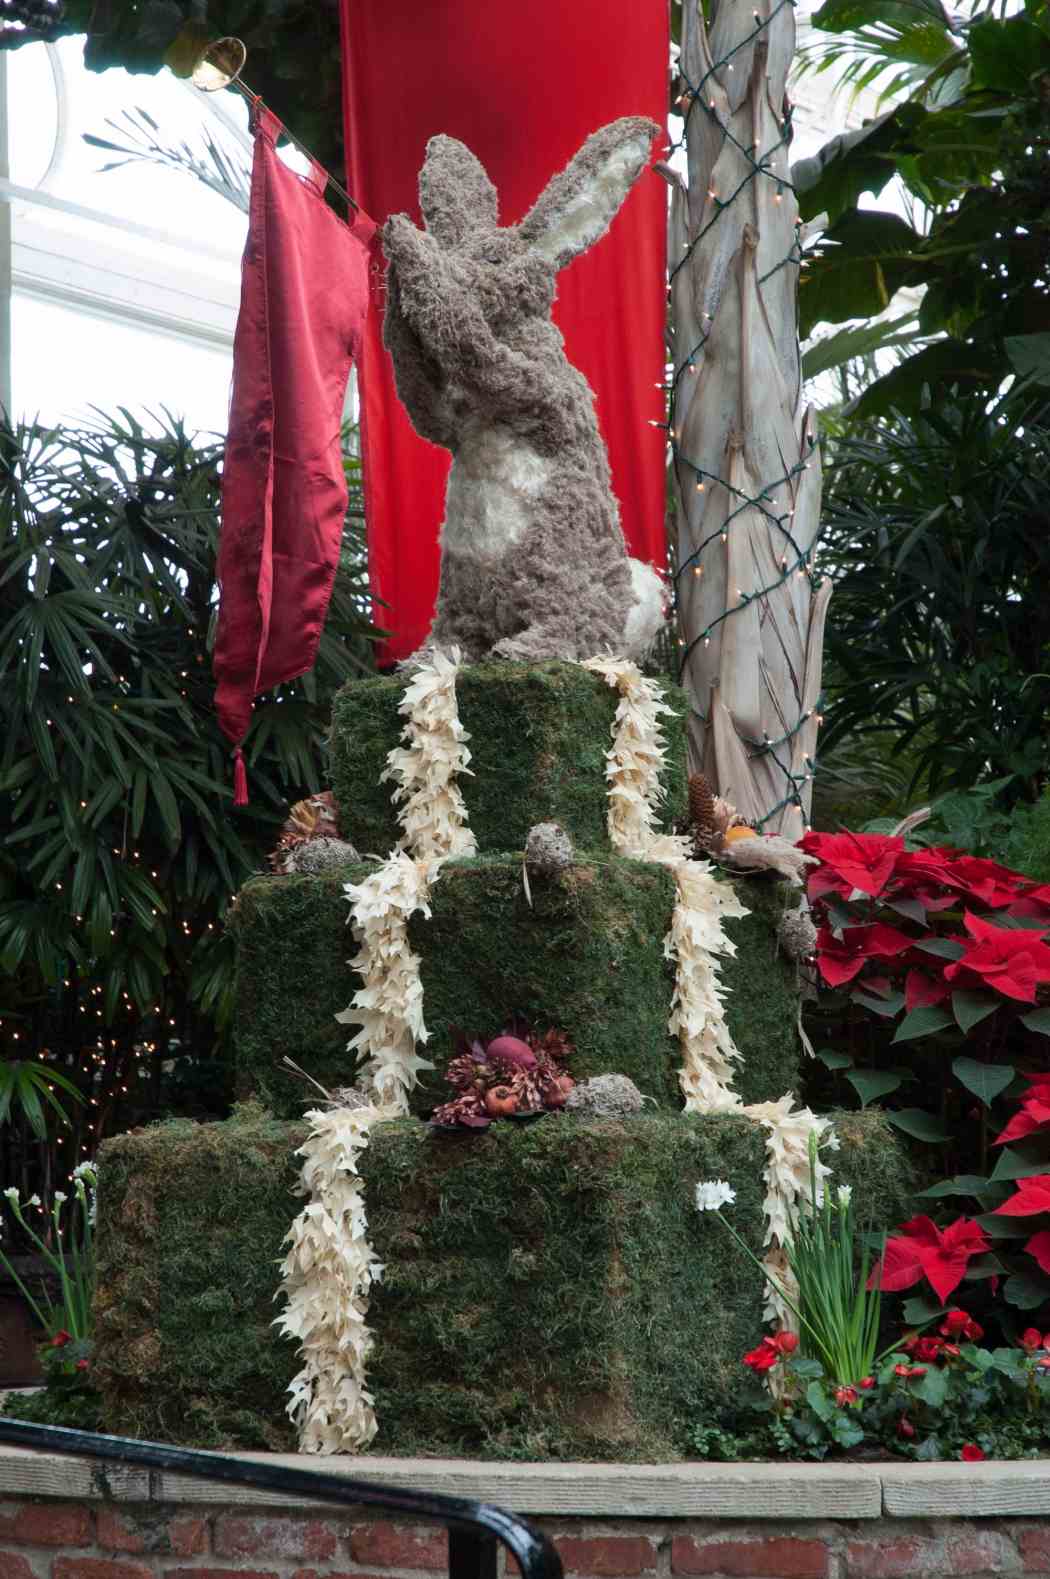 Winter Flower Show 2005: One Enchanted Evening